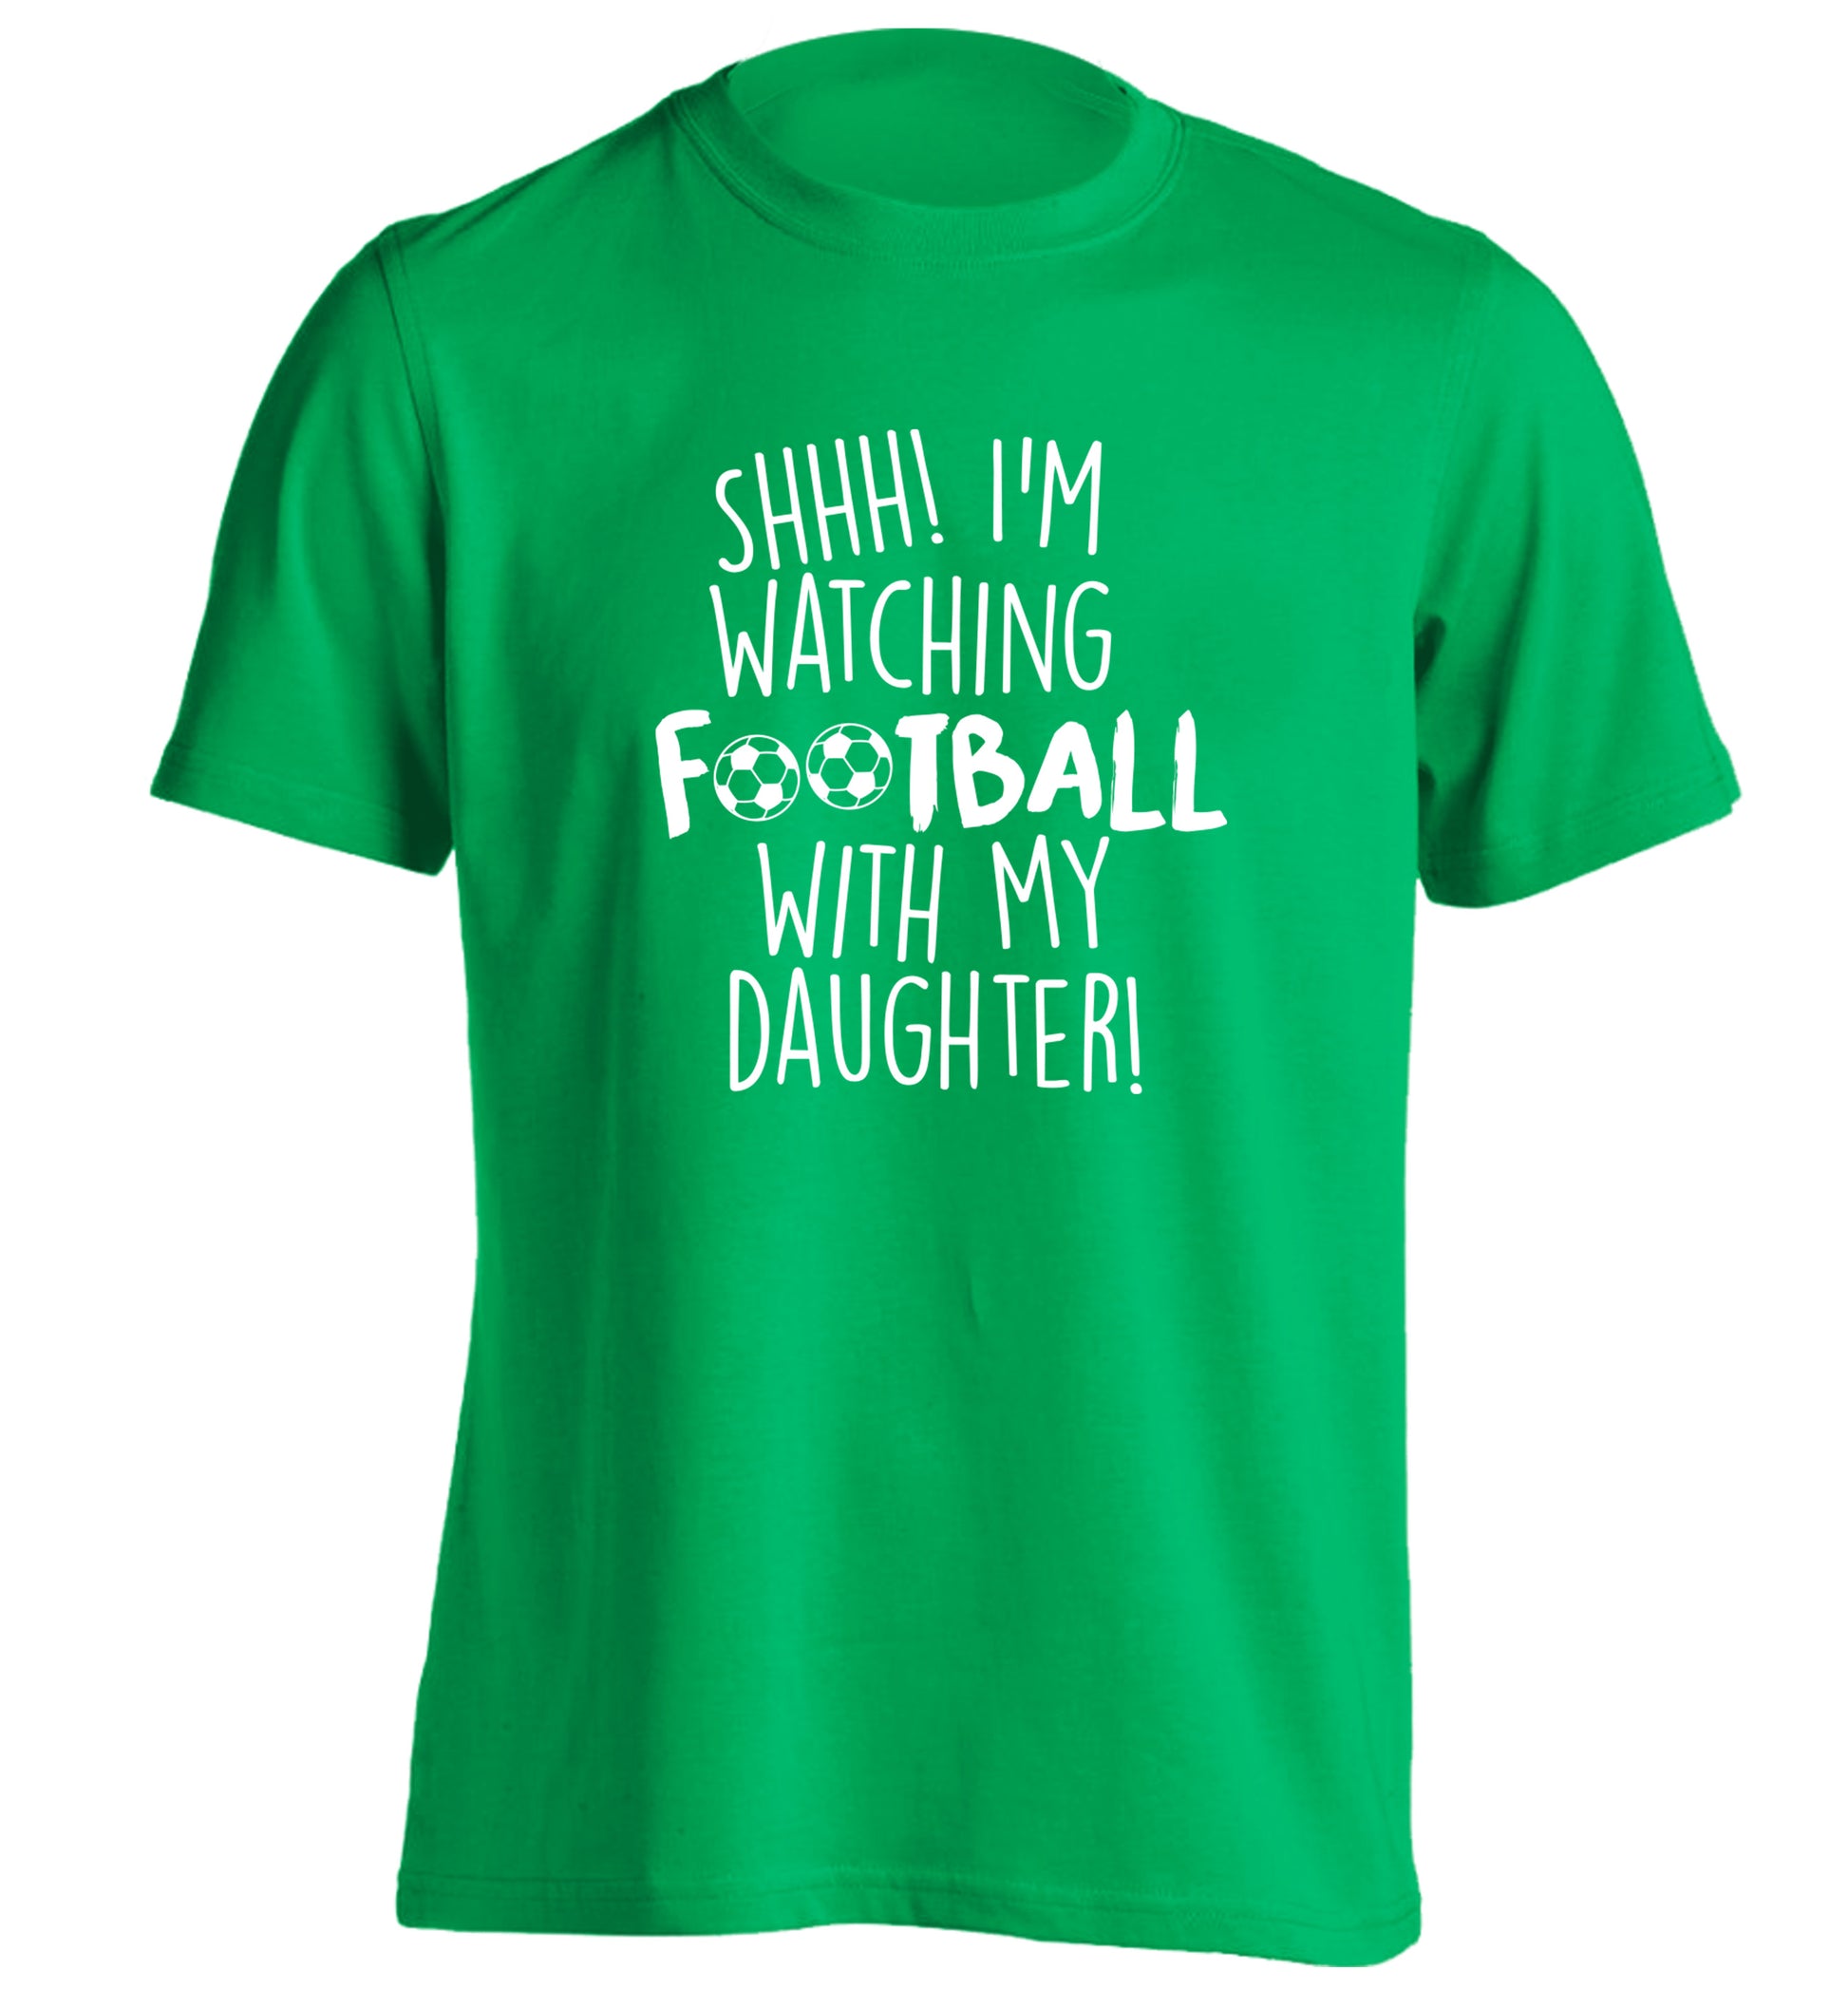 Shhh I'm watching football with my daughter adults unisexgreen Tshirt 2XL